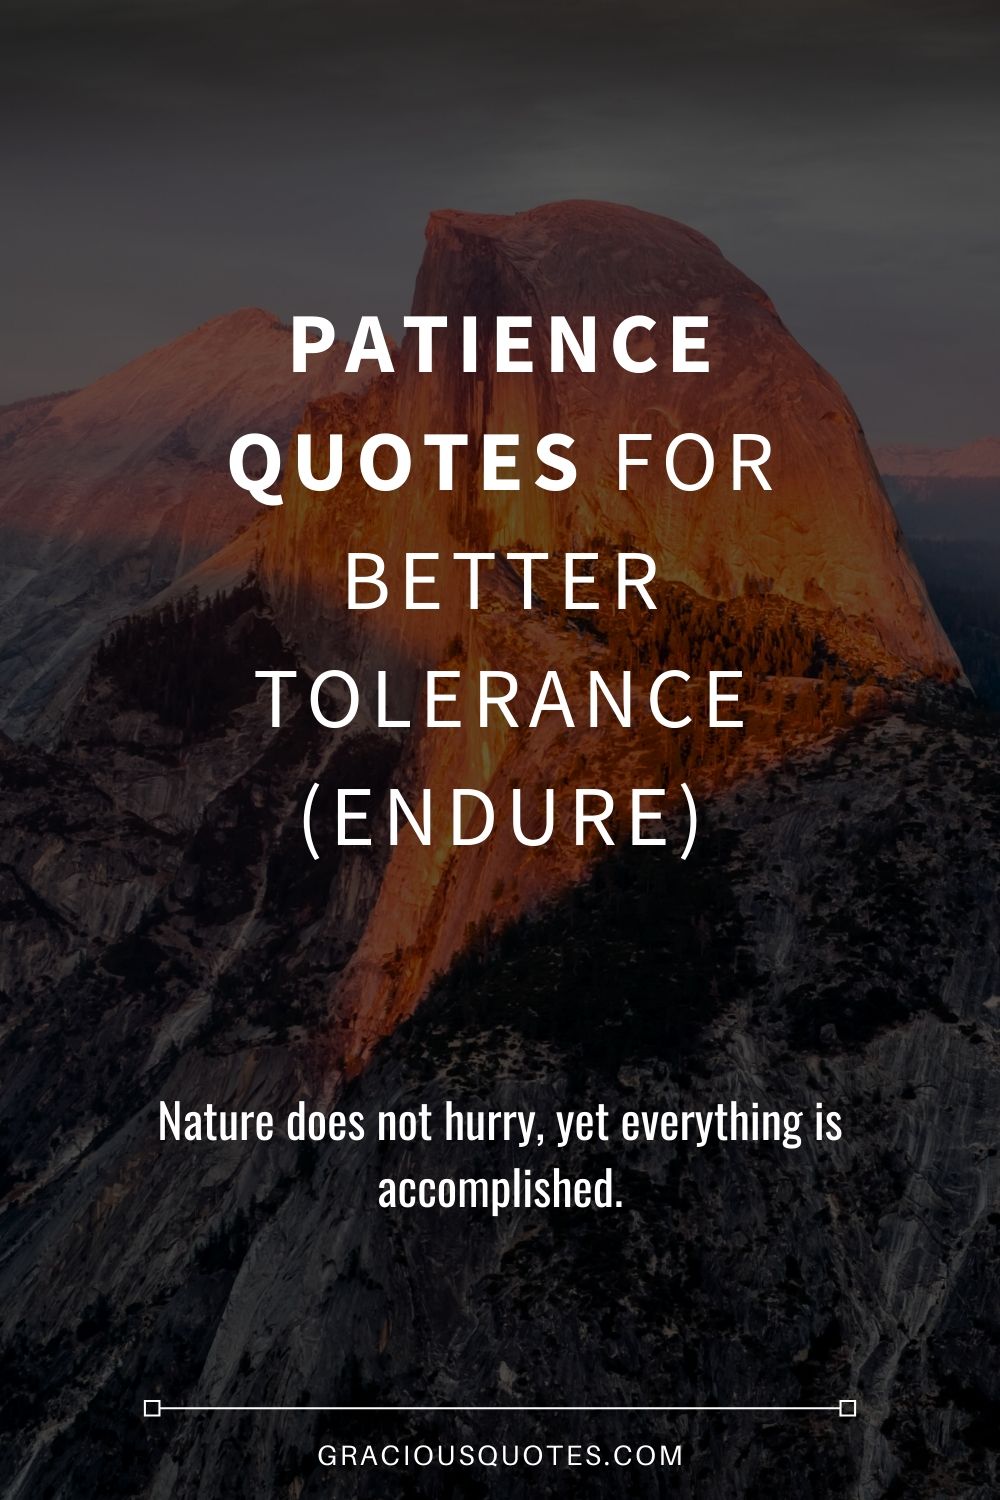 Test your patience, and… well mostly your patience